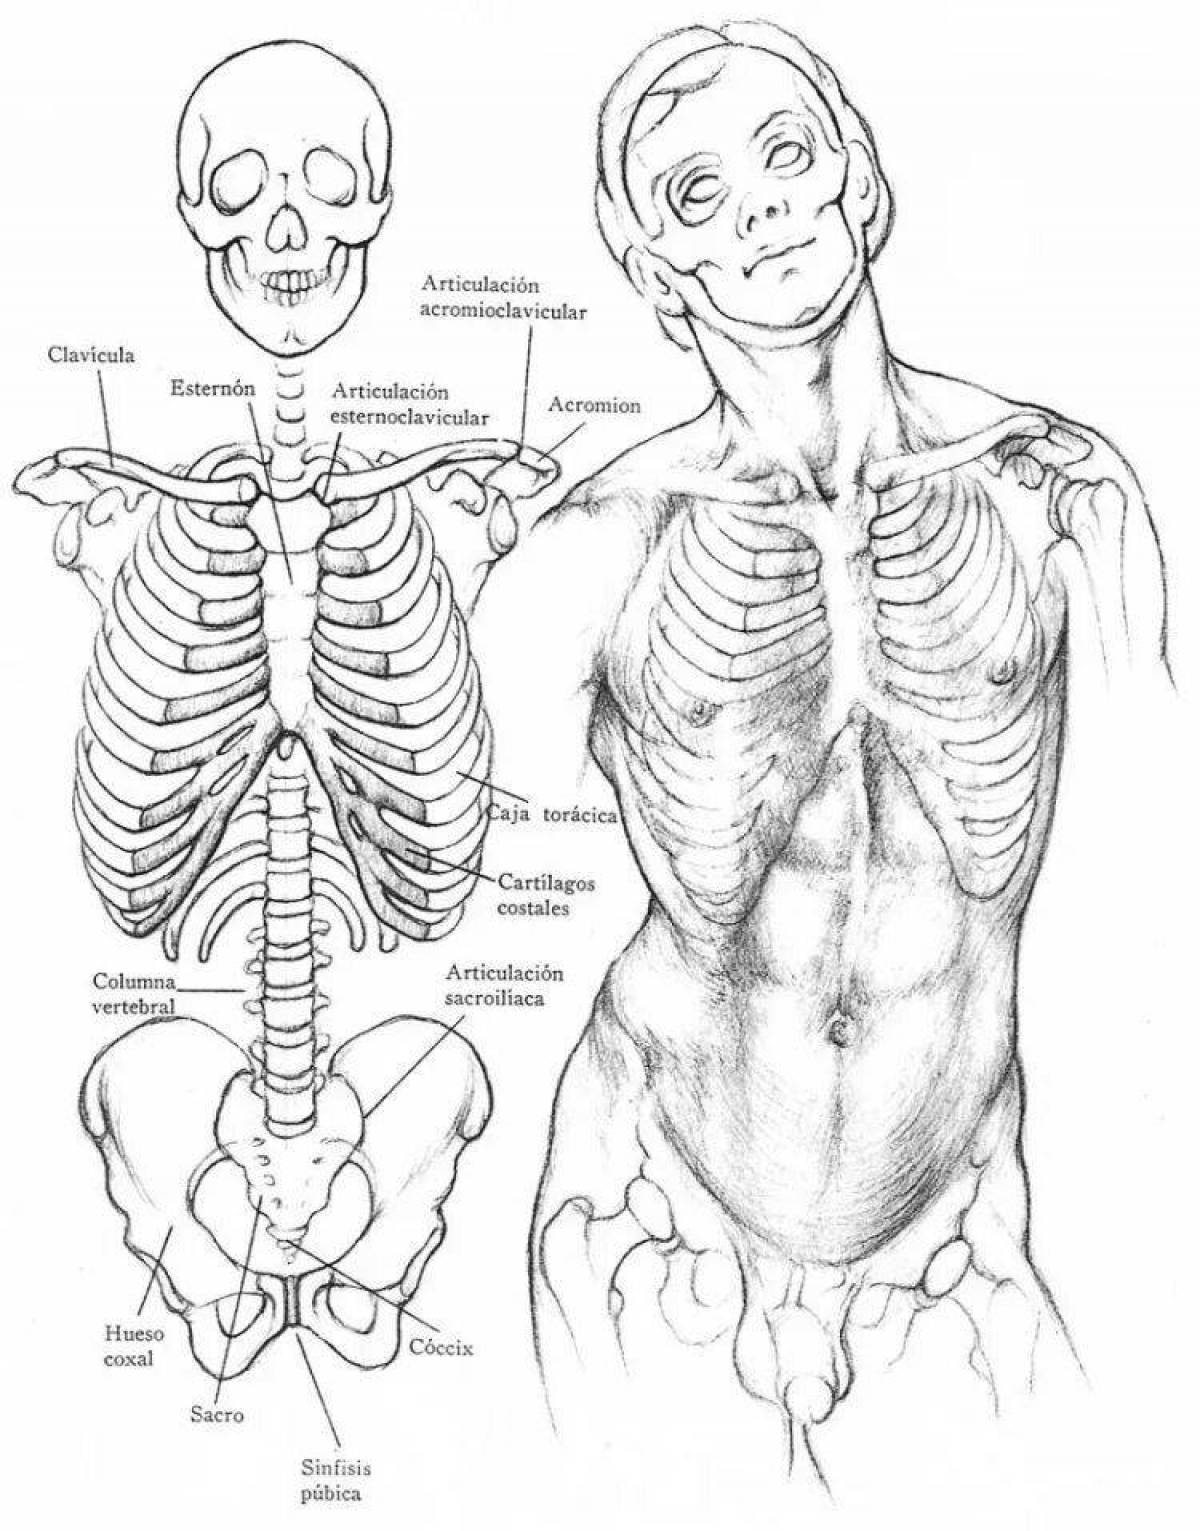 Great anatomical coloring book